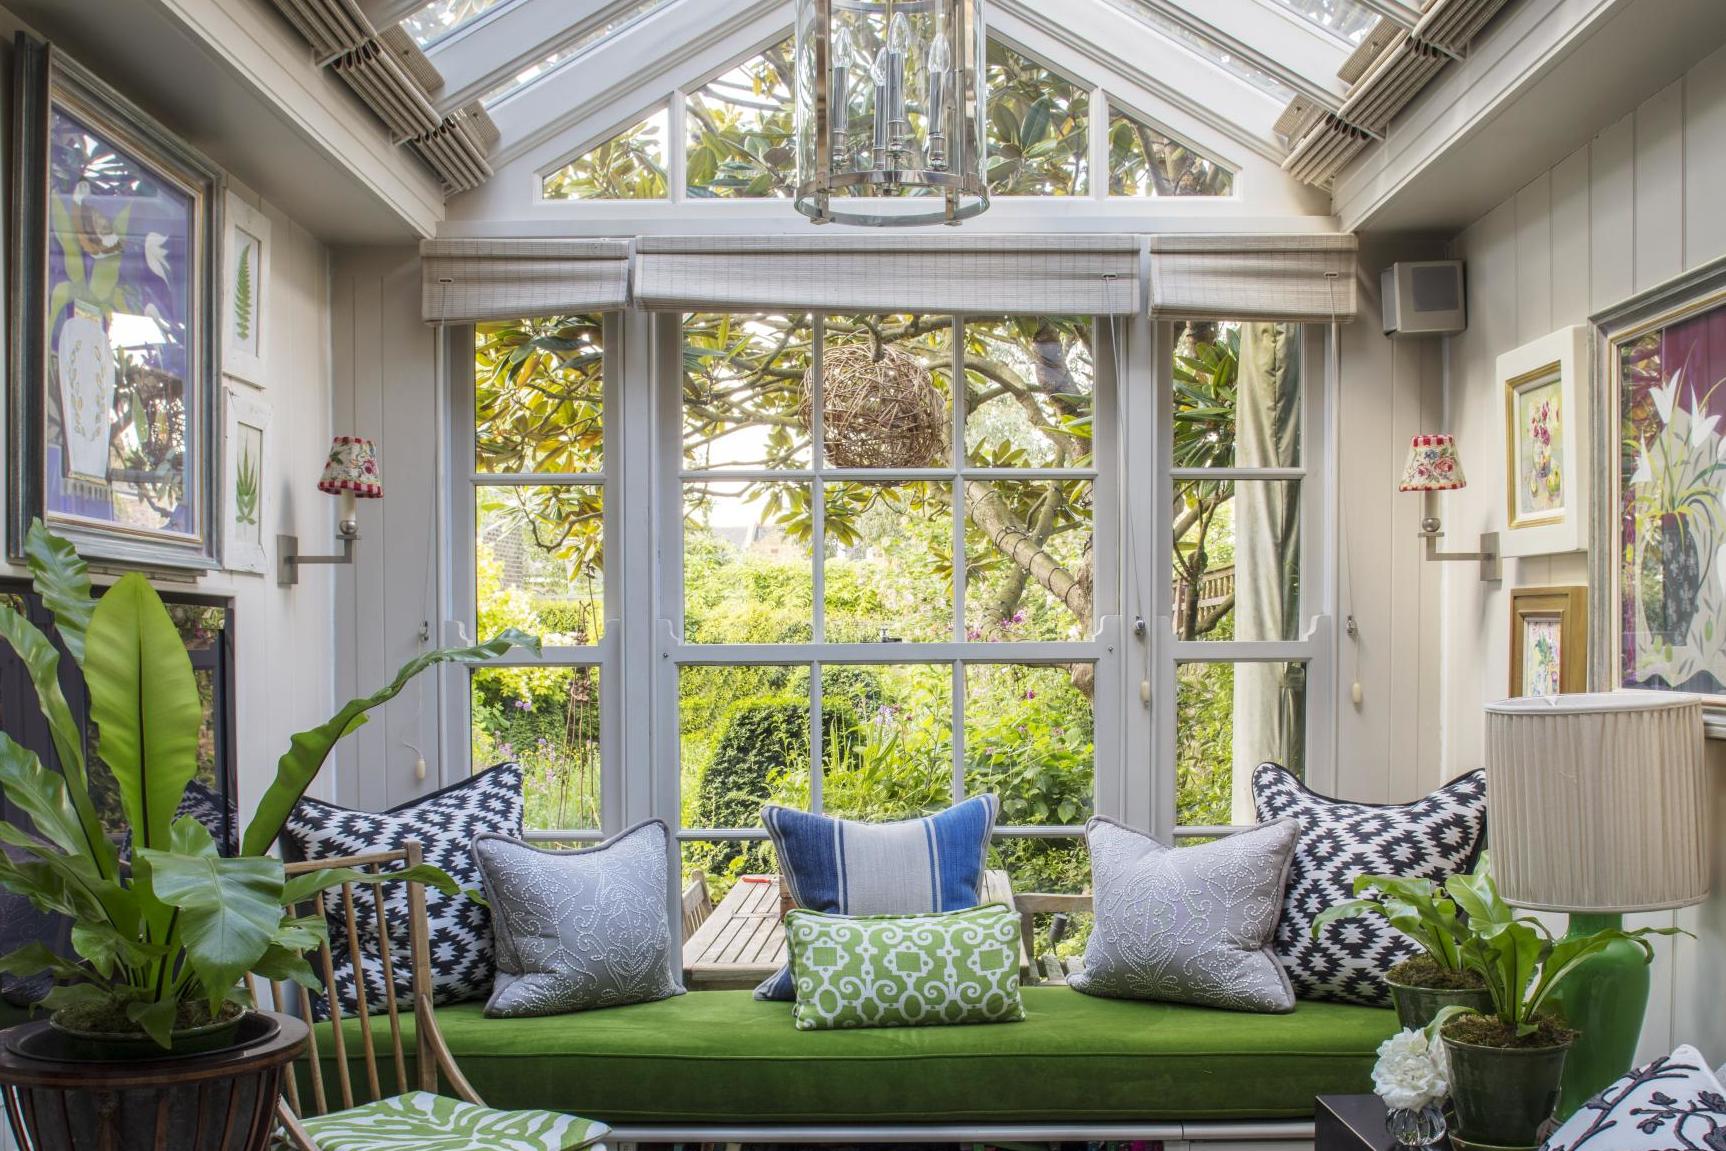 Many in the study were keen to use their space to build a conservatory –bringing the outside in